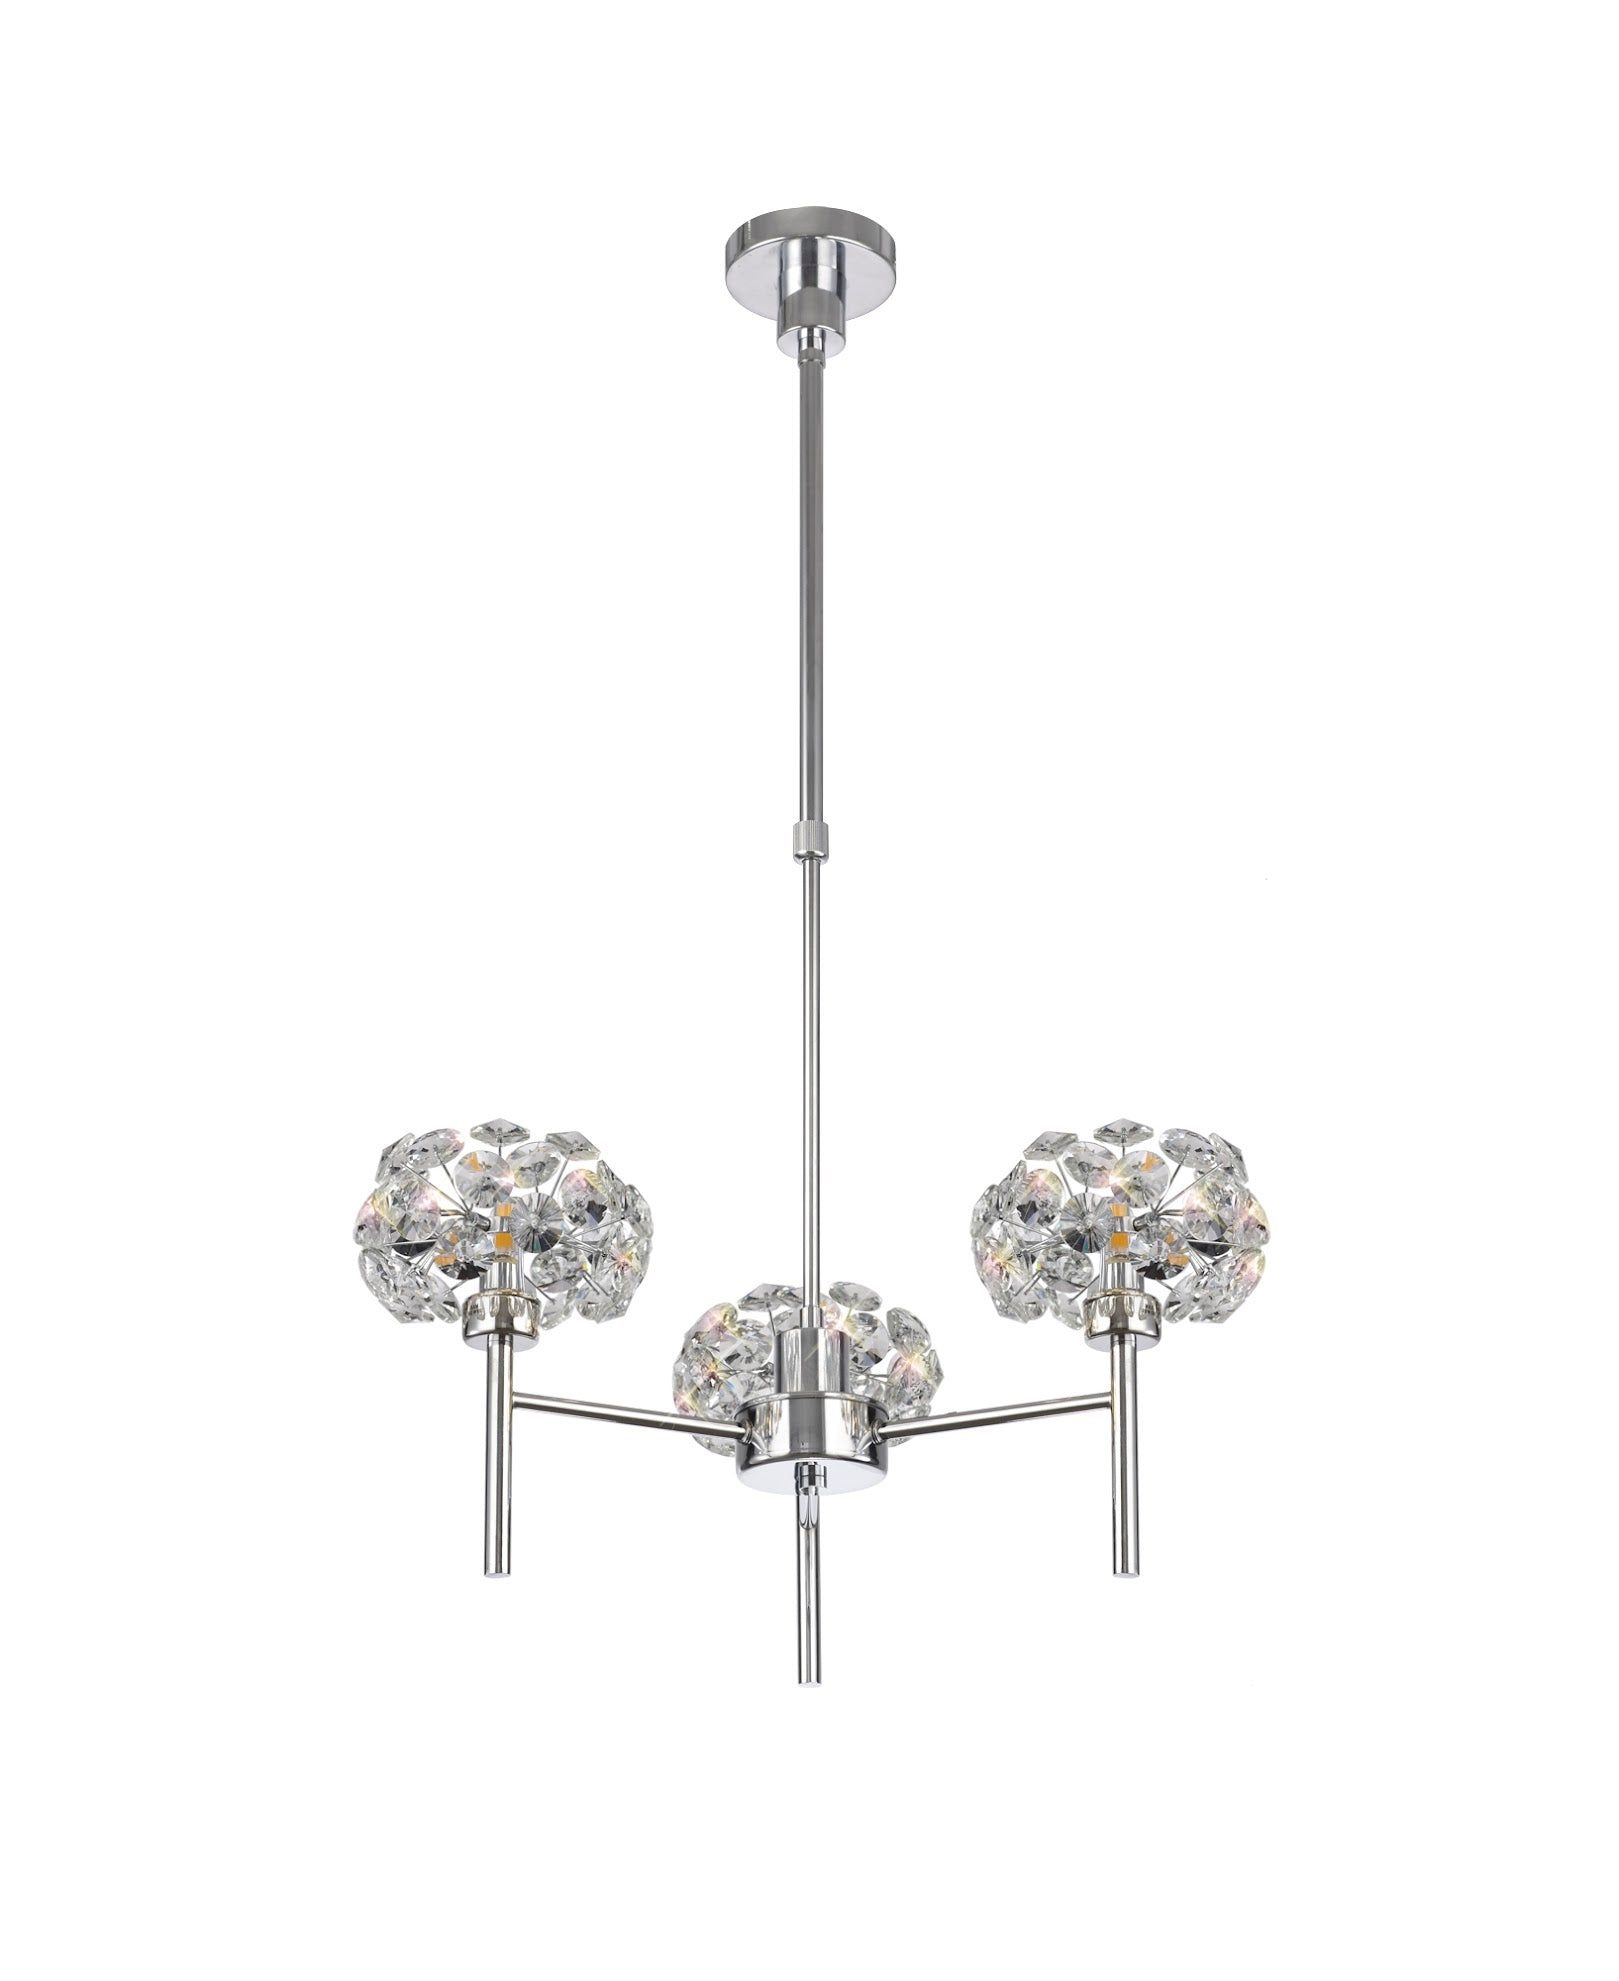 Cassis/Sophia 3 Light G9 Telescopic Light With Polished Chrome And Crystal Shade